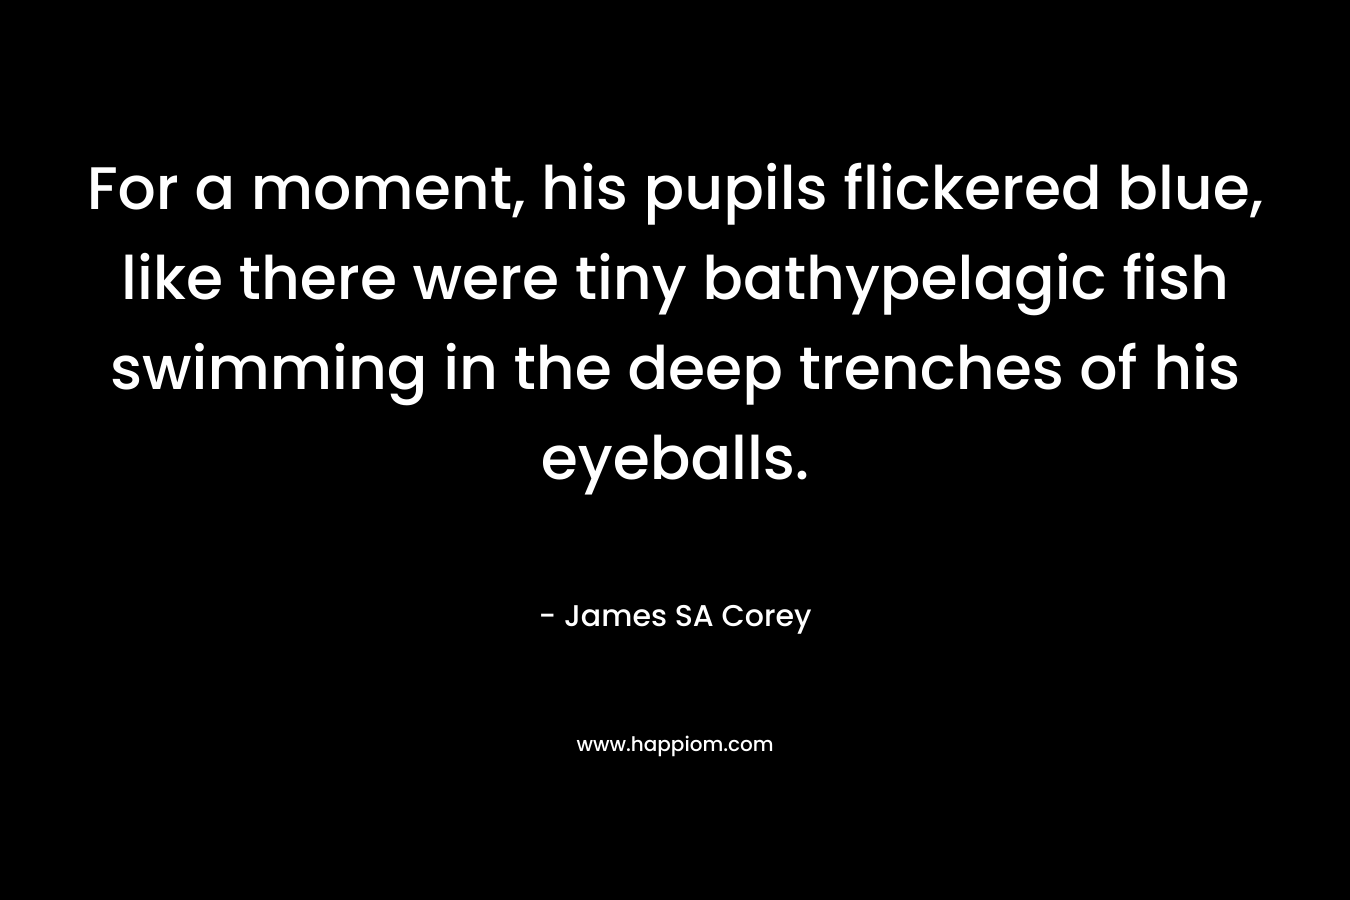 For a moment, his pupils flickered blue, like there were tiny bathypelagic fish swimming in the deep trenches of his eyeballs. – James SA Corey